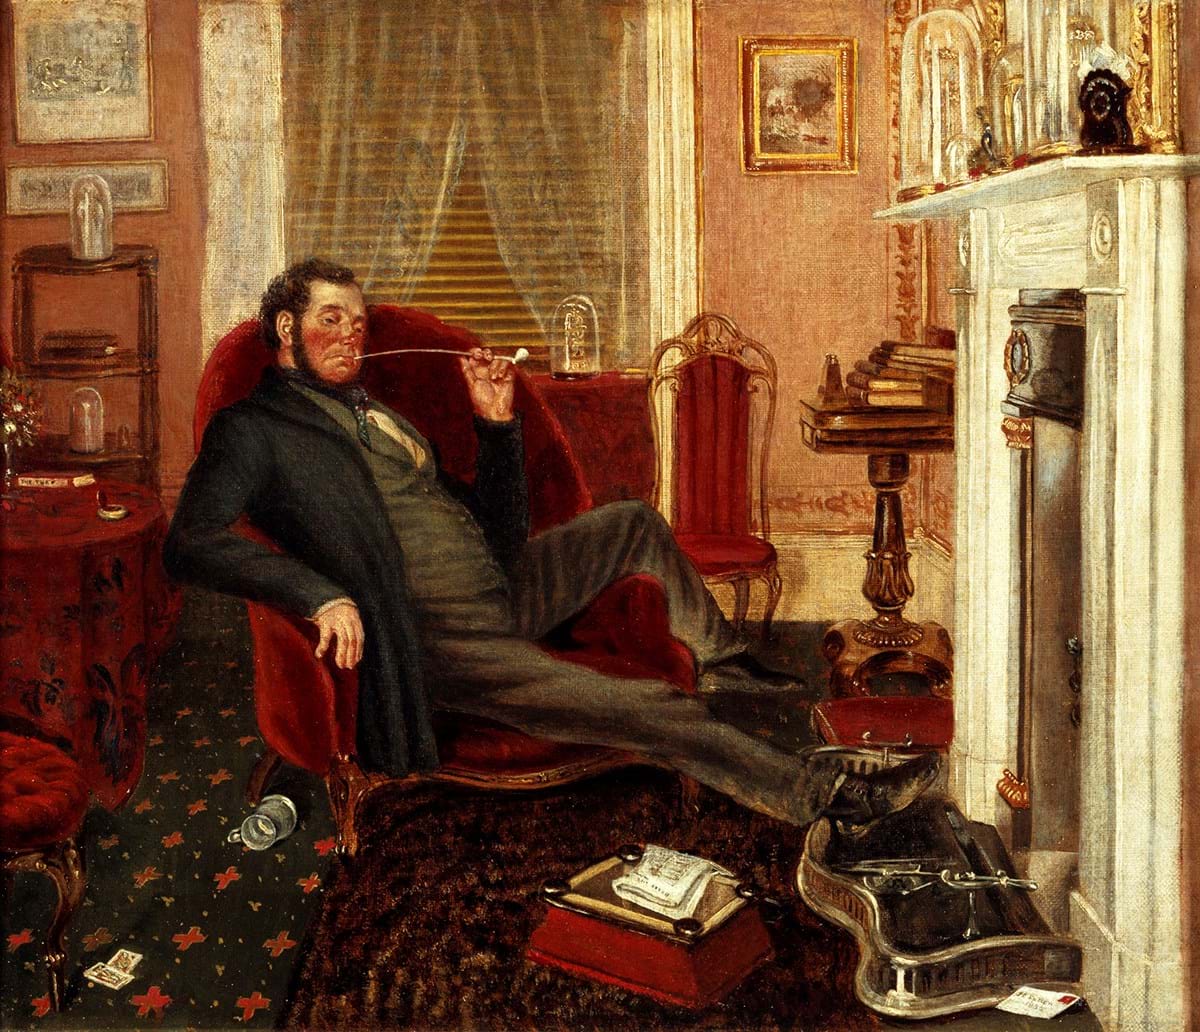 Painting of a person reclining on a chair smoking a pipe in front of a fireplace